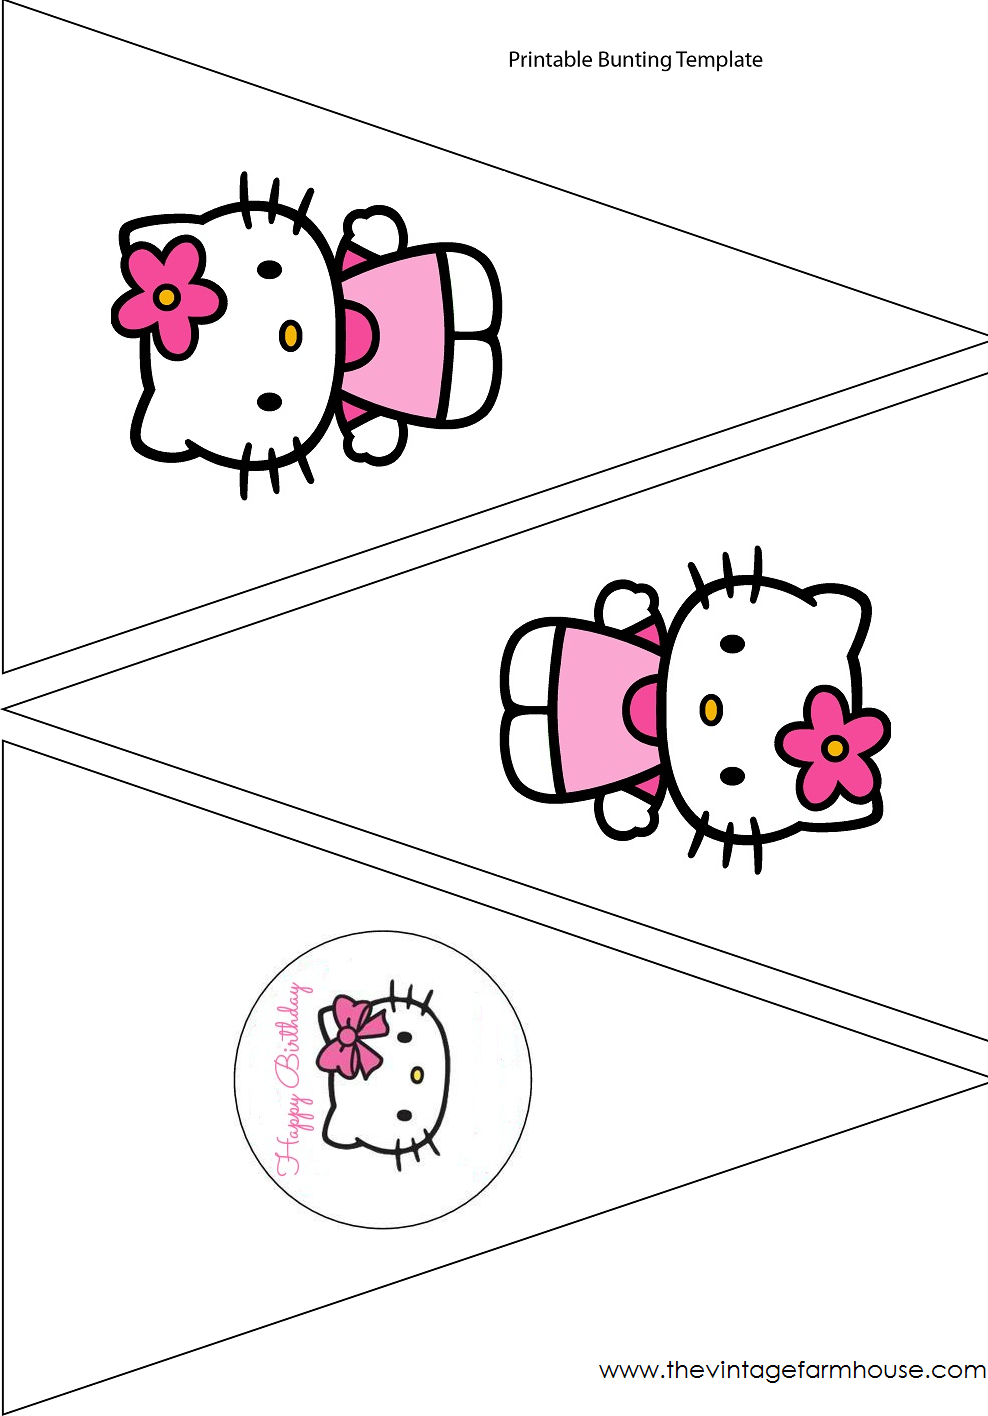 Simple Cute Hello Kitty Free Printable Kit. – Oh My Fiesta With Regard To Hello Kitty Birthday Banner Template Free